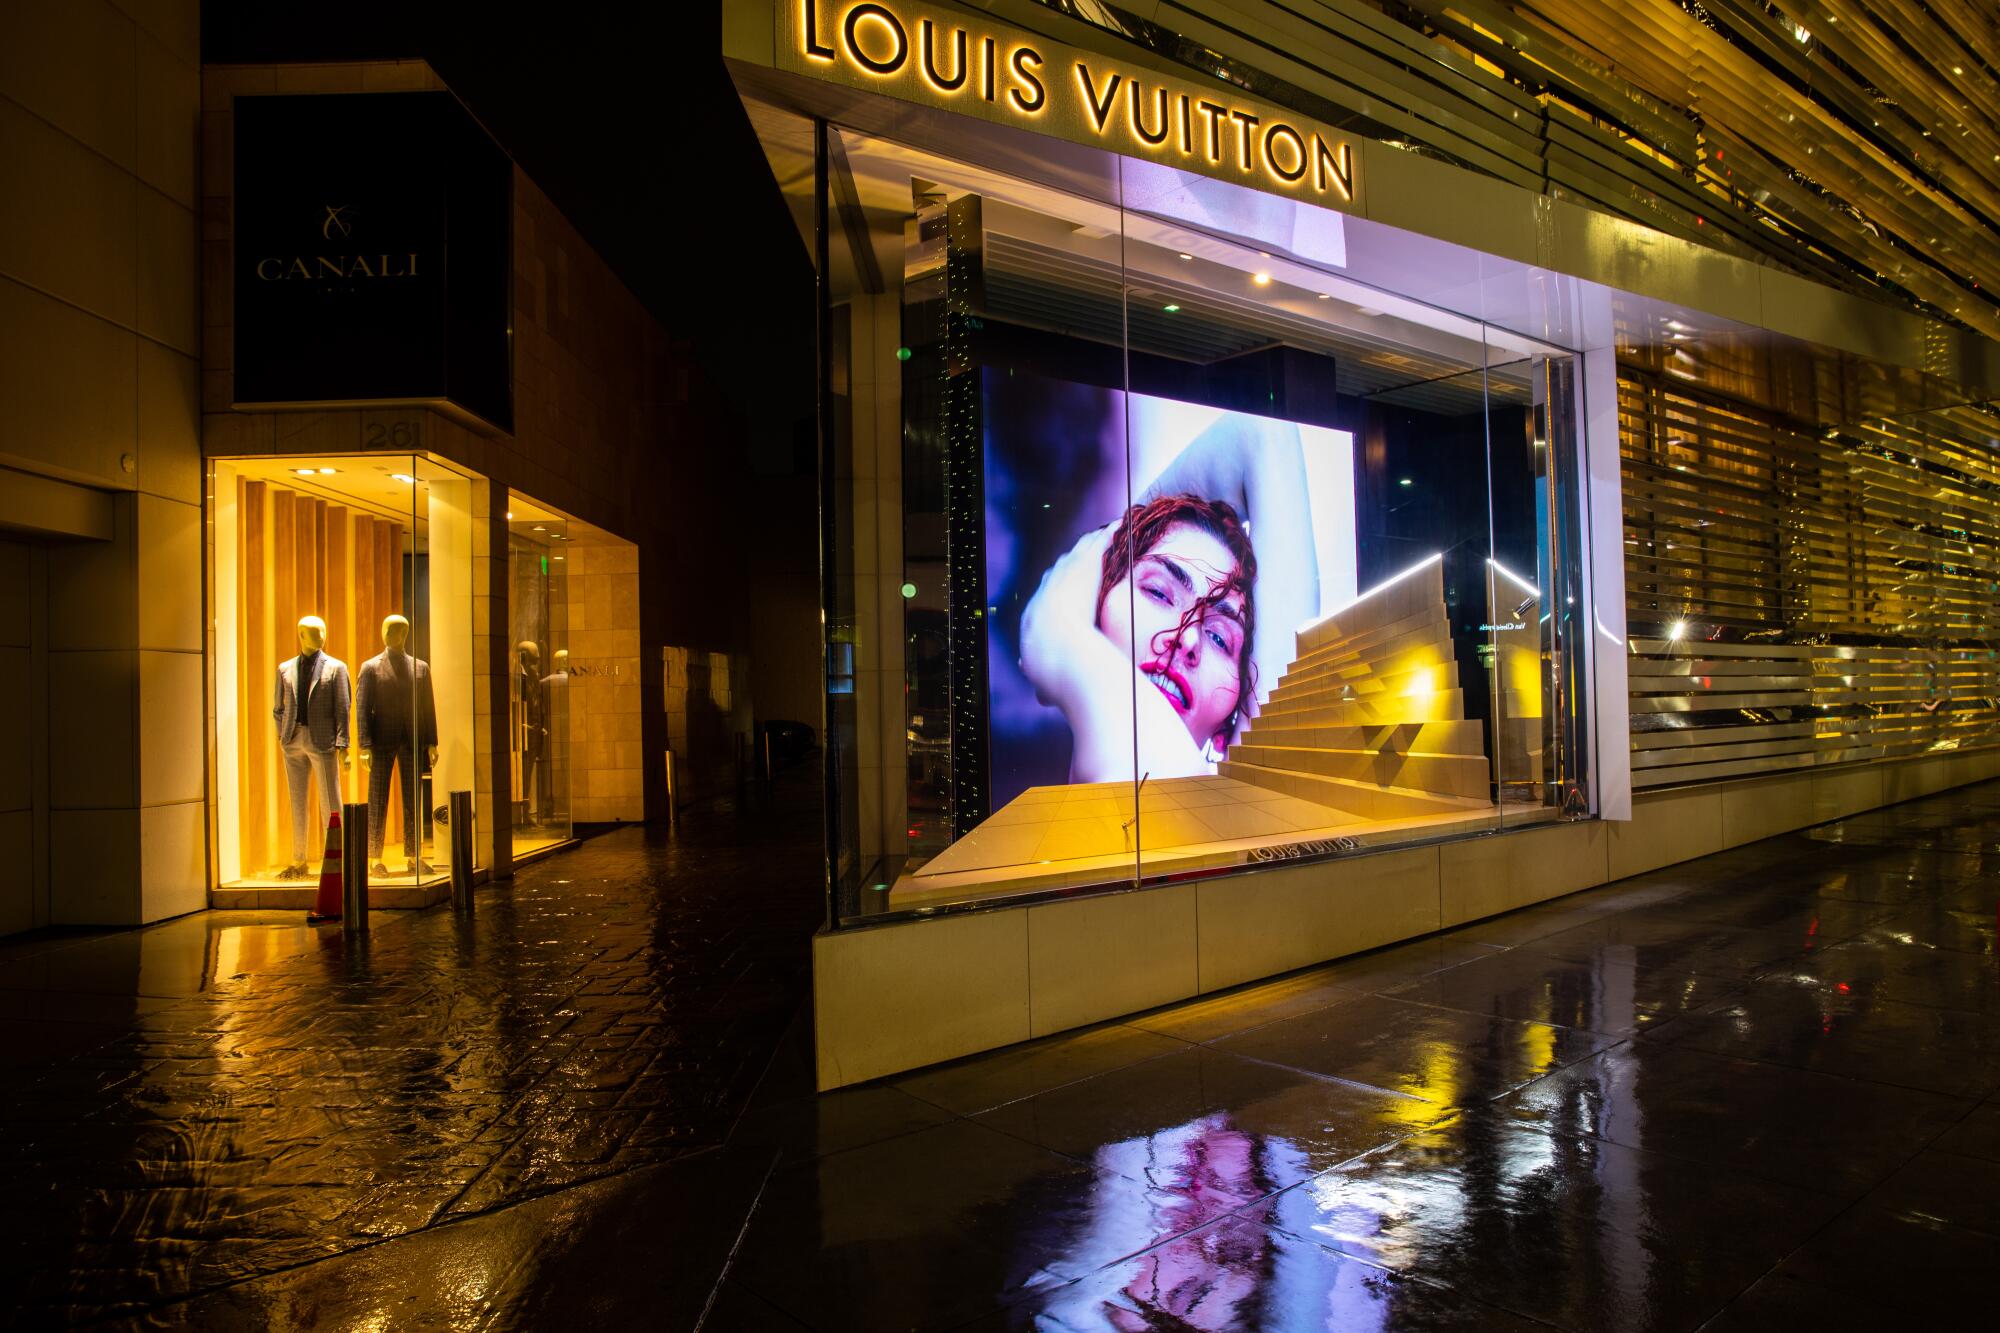 Louis Vuitton Store At Rodeo Drive In Beverly Hills California